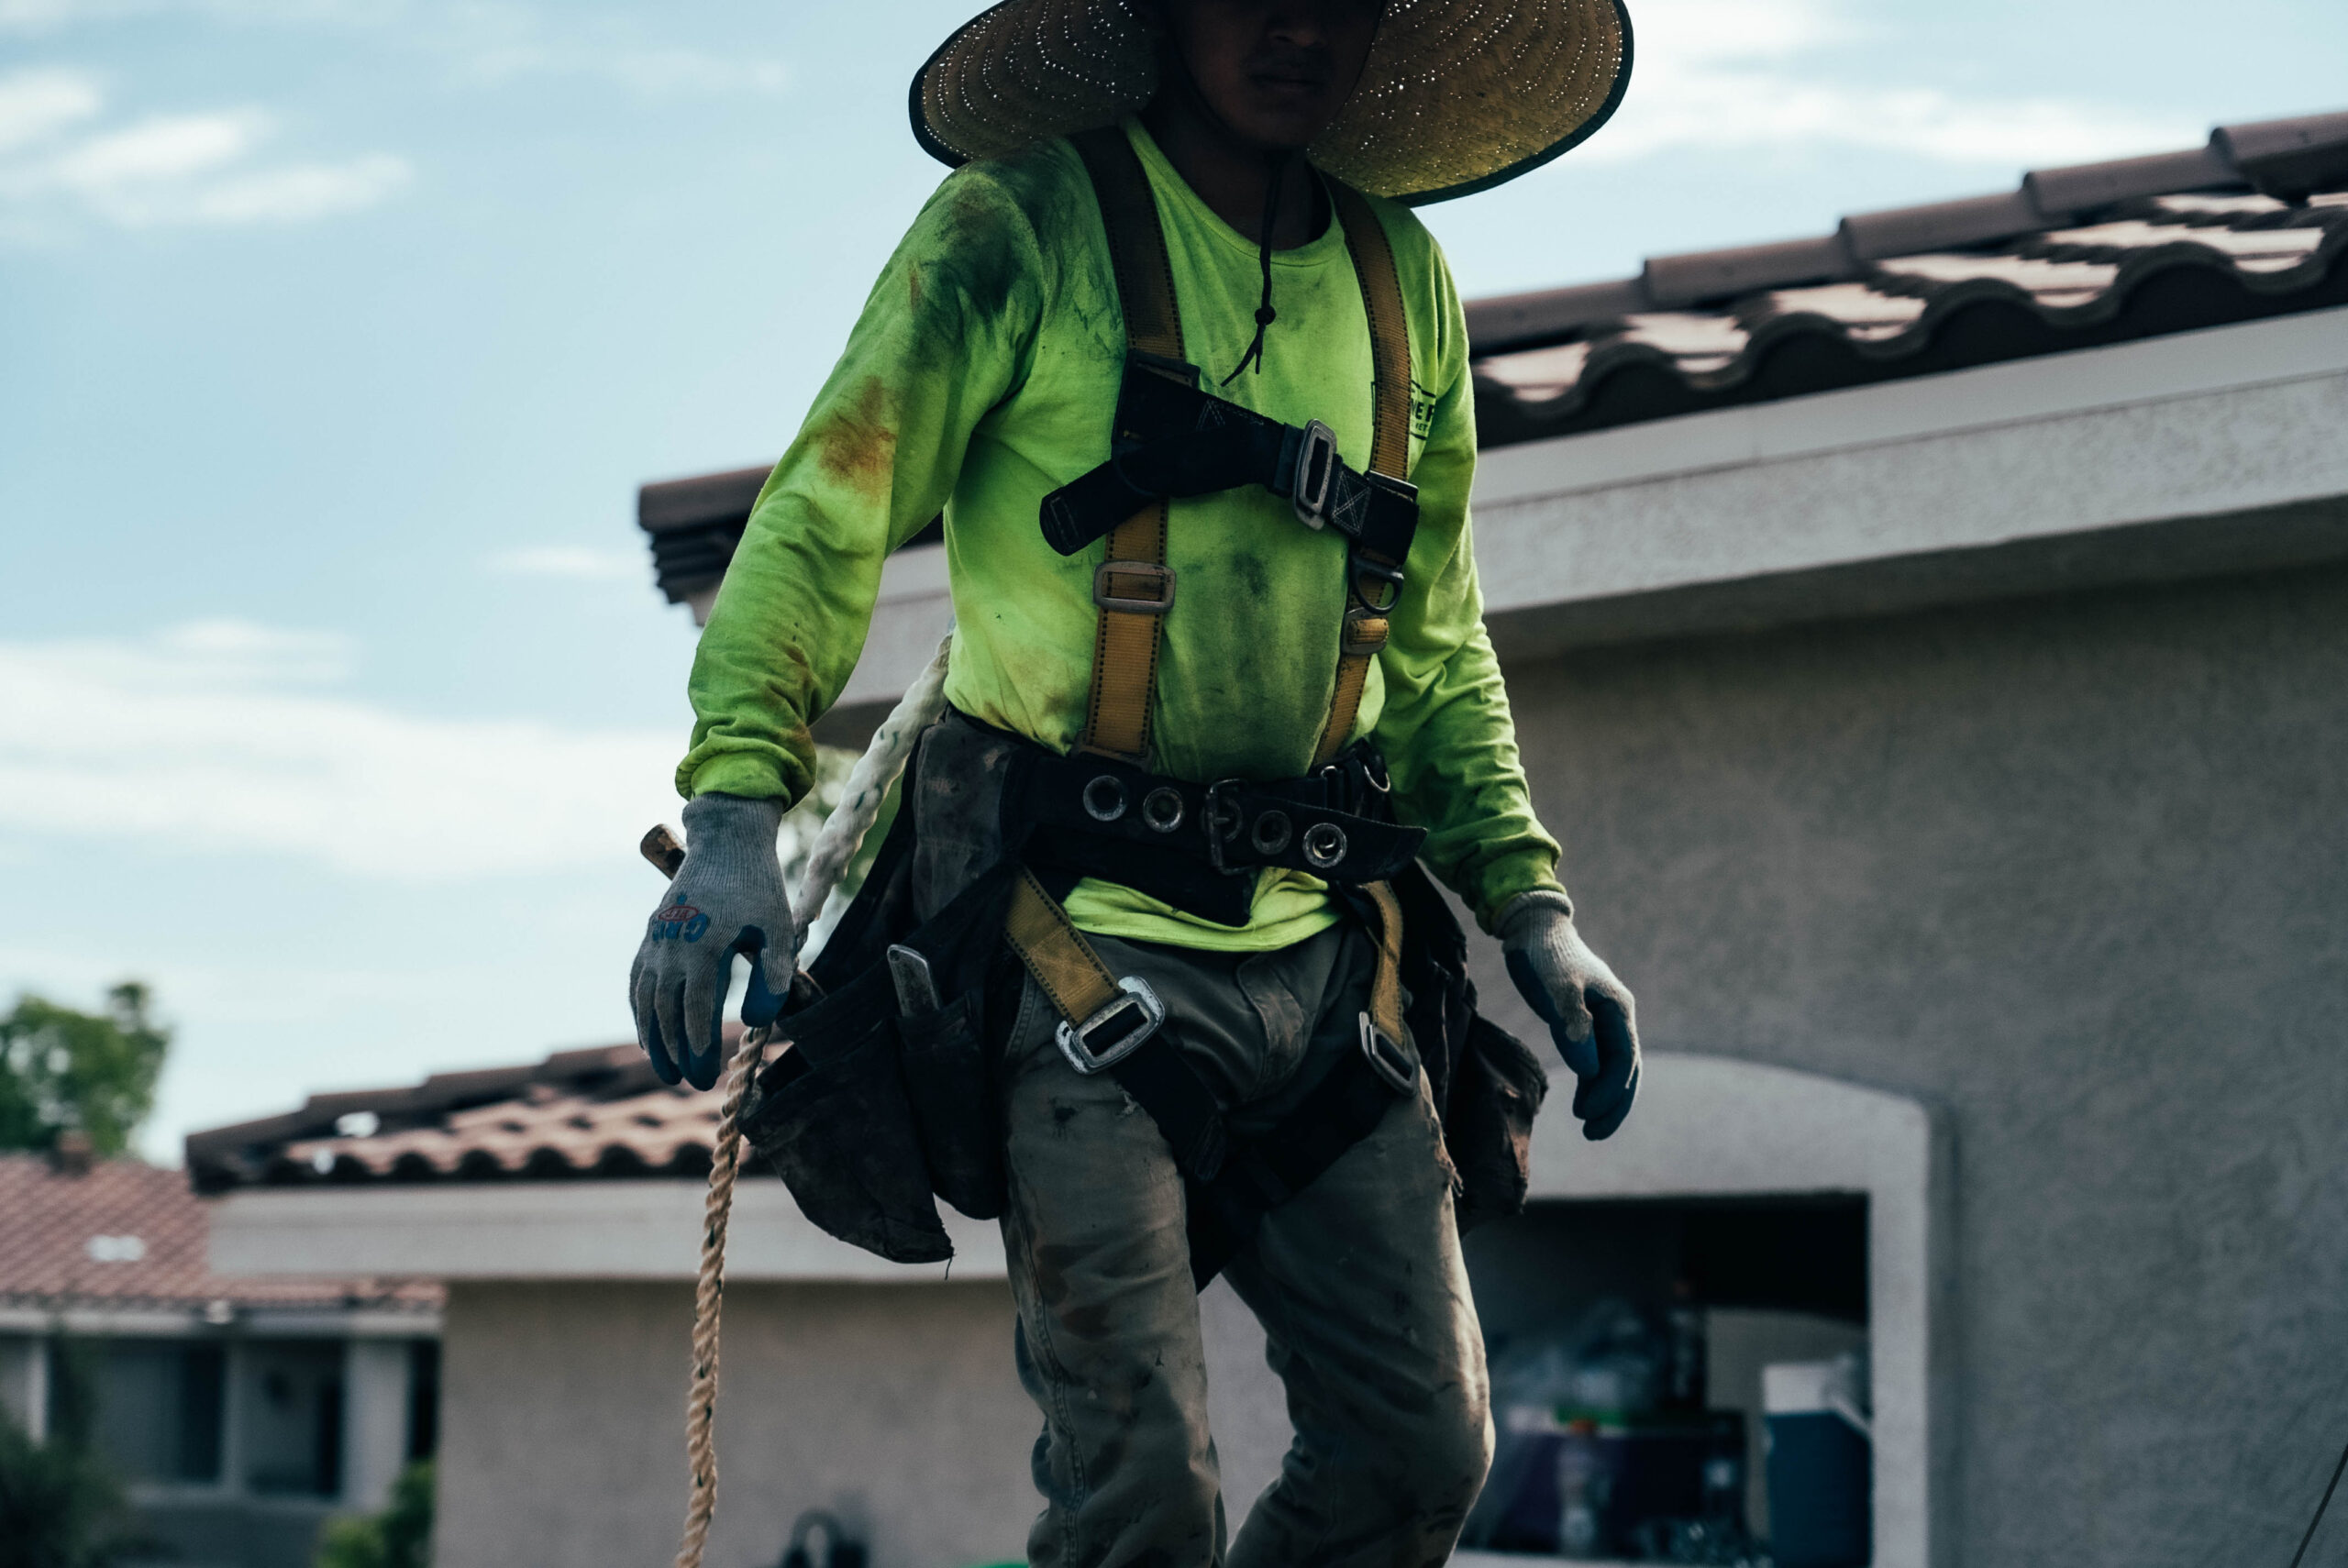 A worker repairing a tile roof, a service provided by Behmer roofing in Estancia.